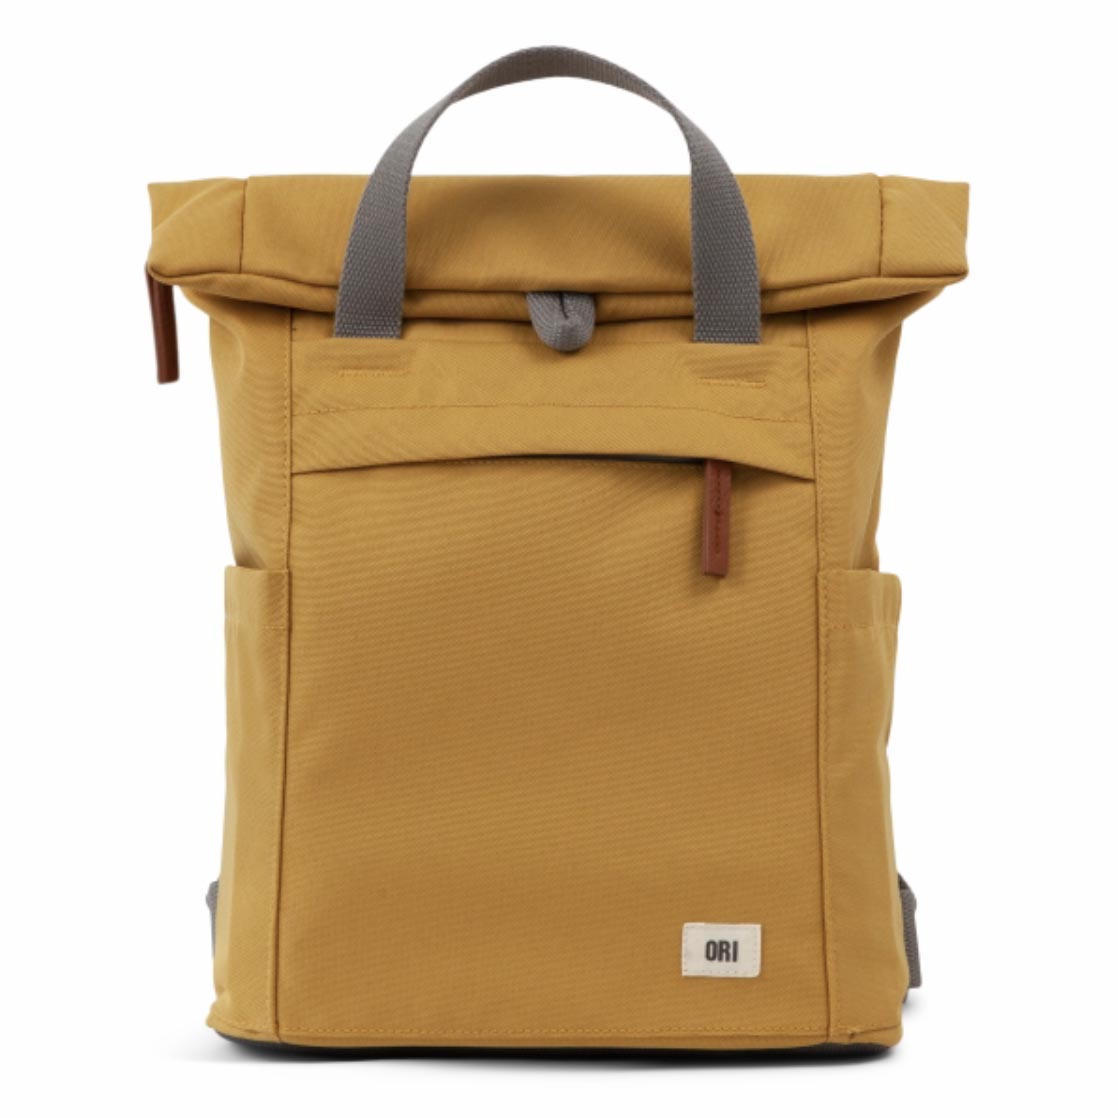 Ori - Finchley Sustainable Backpack